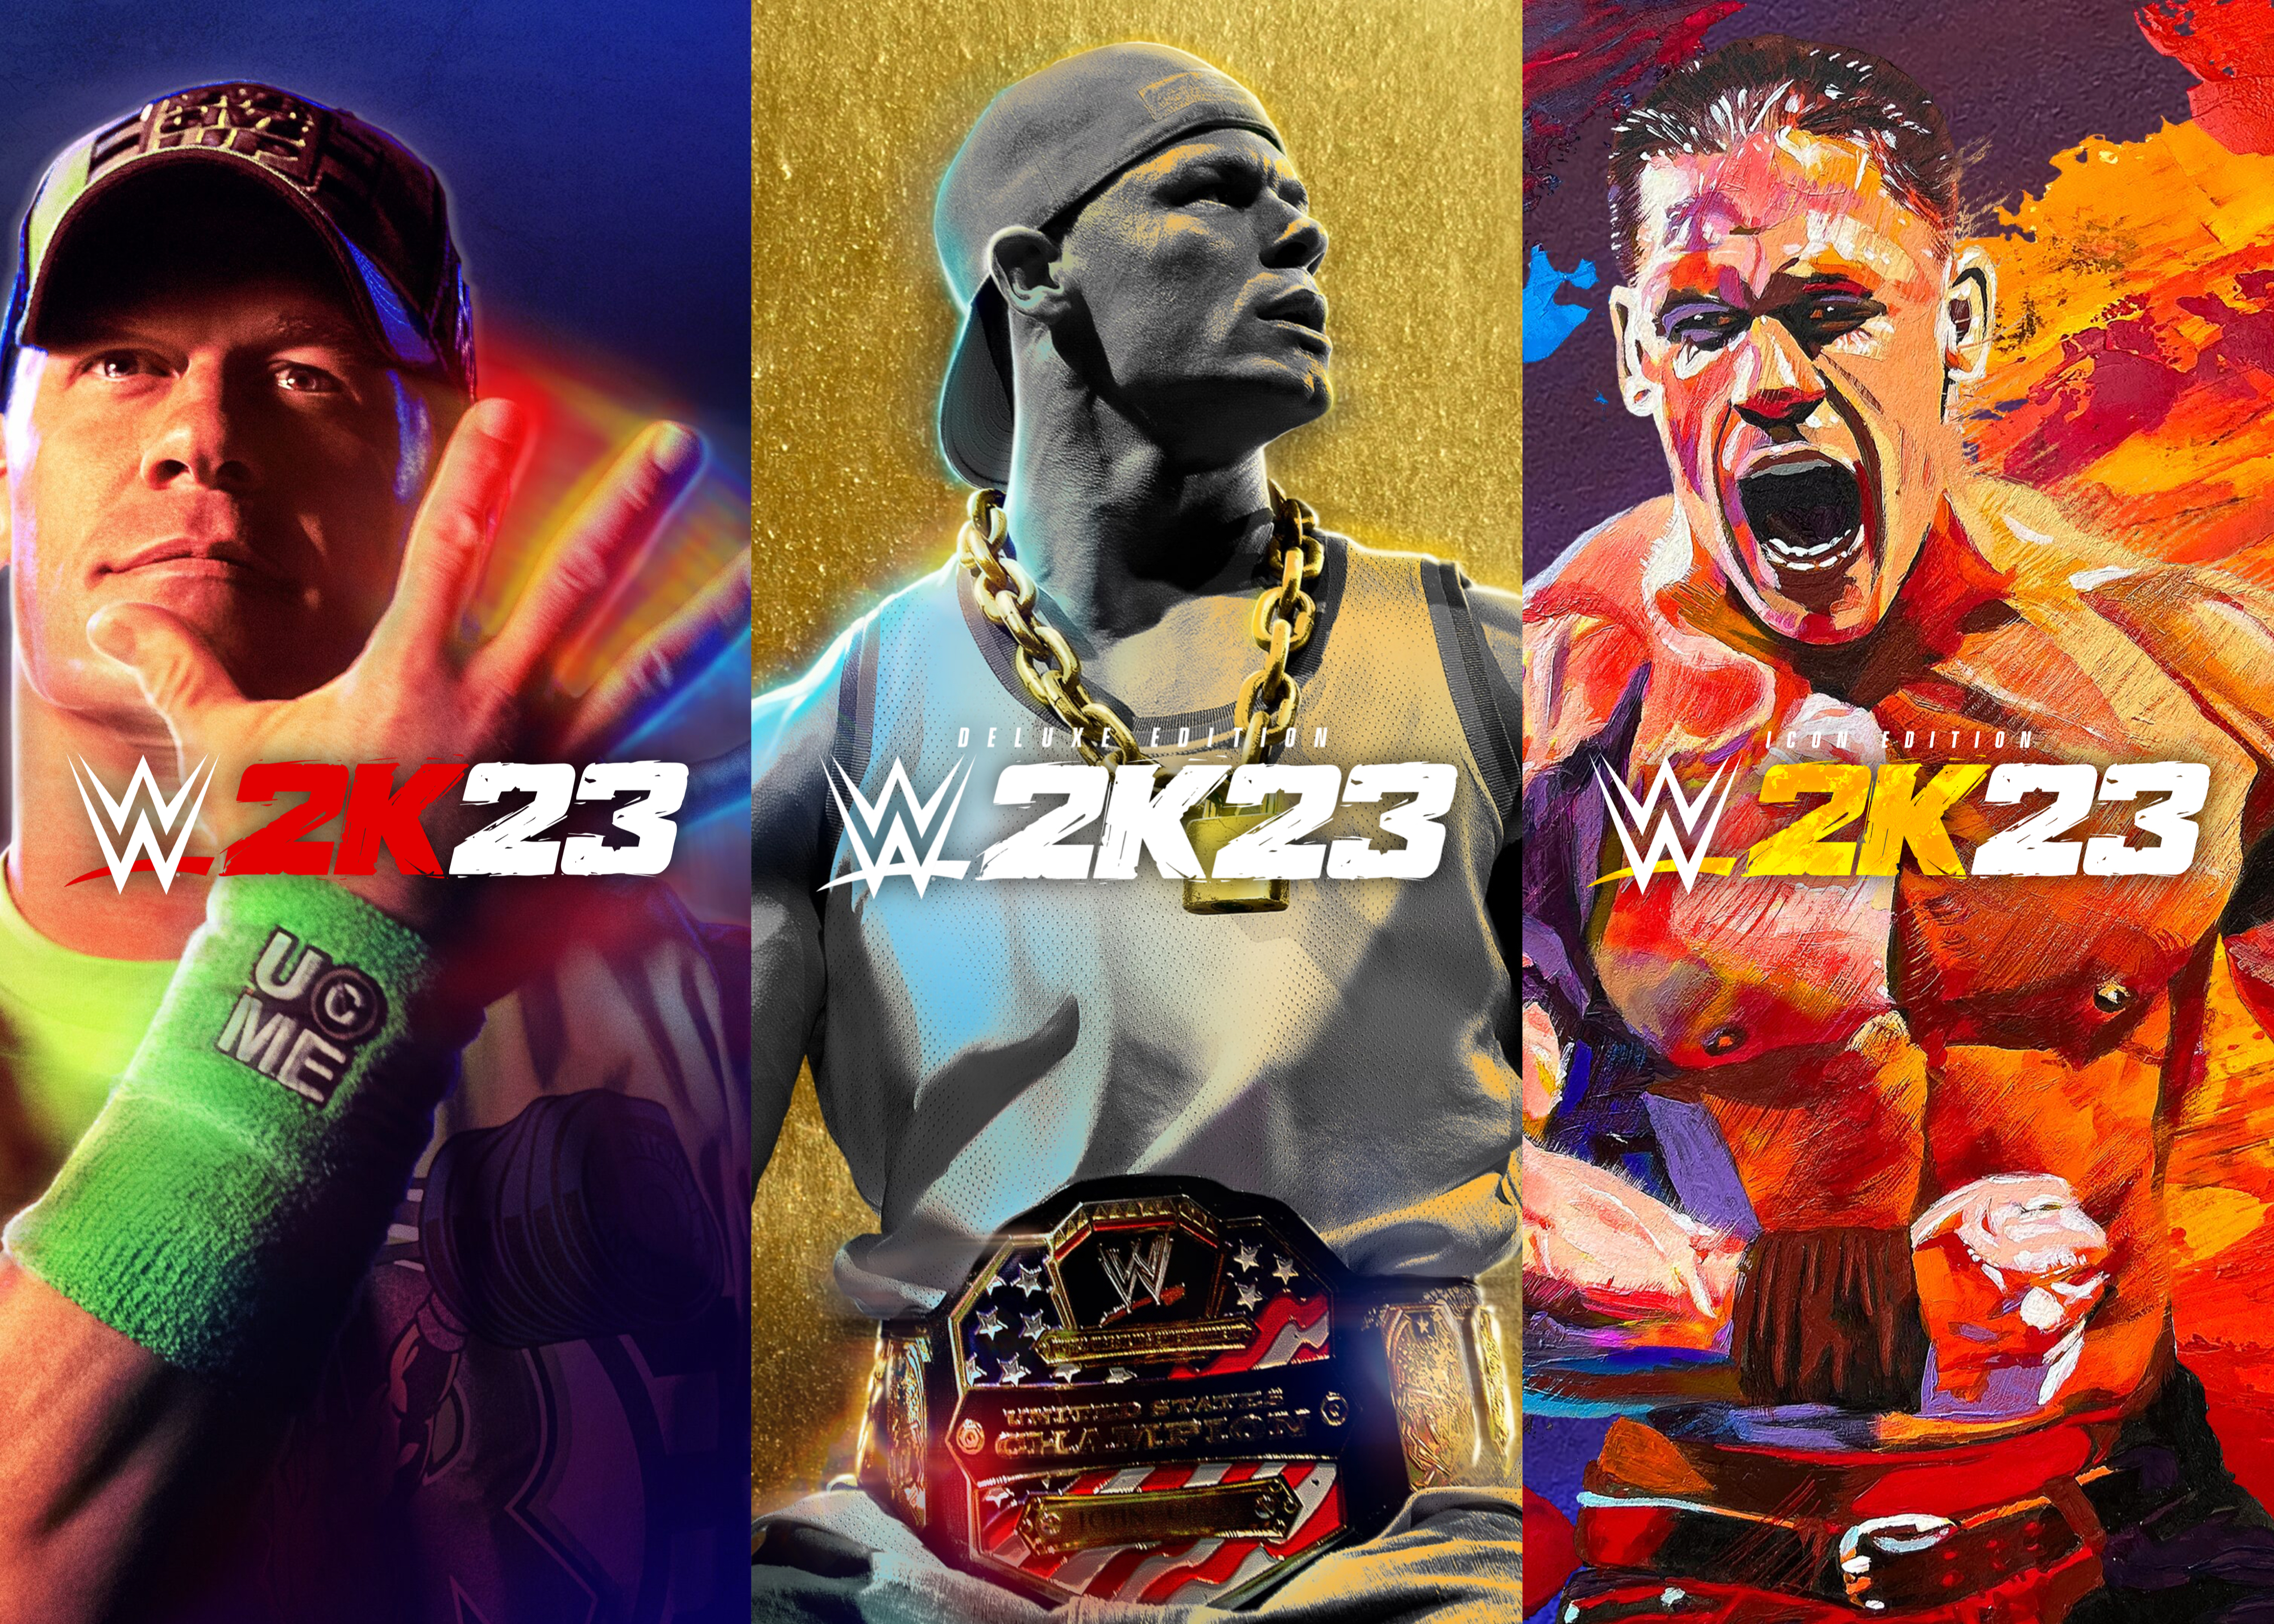 WWE 2K23 Reveals John Cena as Cover Star and Release Date